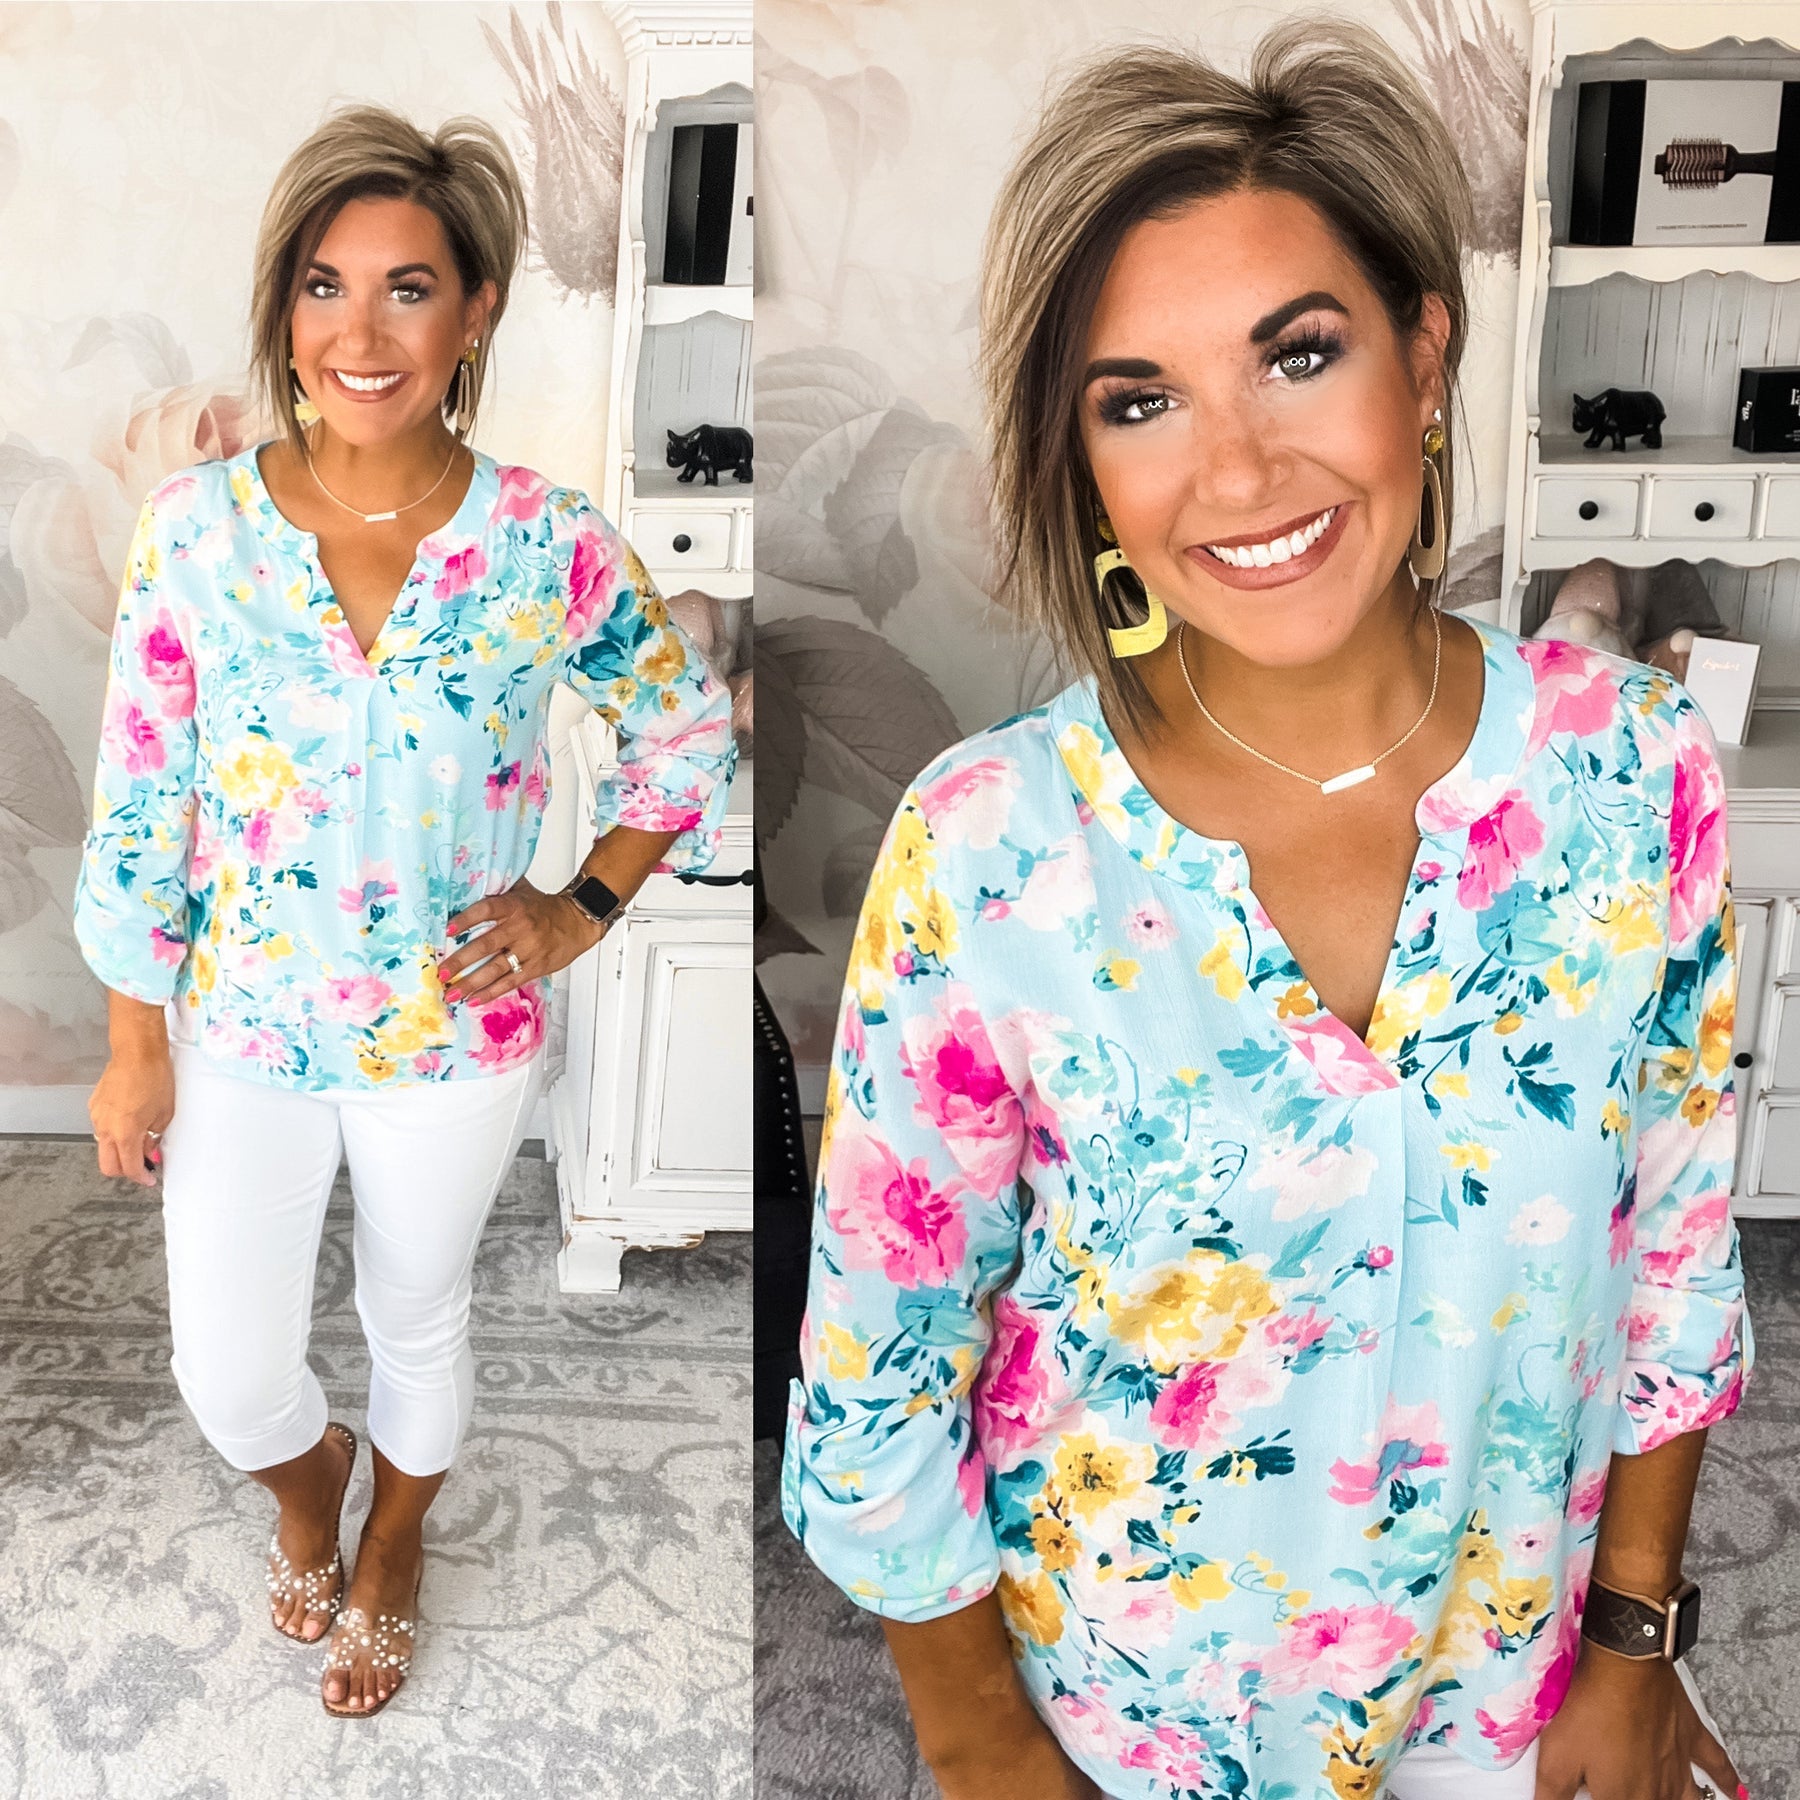 Hello Lady Blouse - Floral